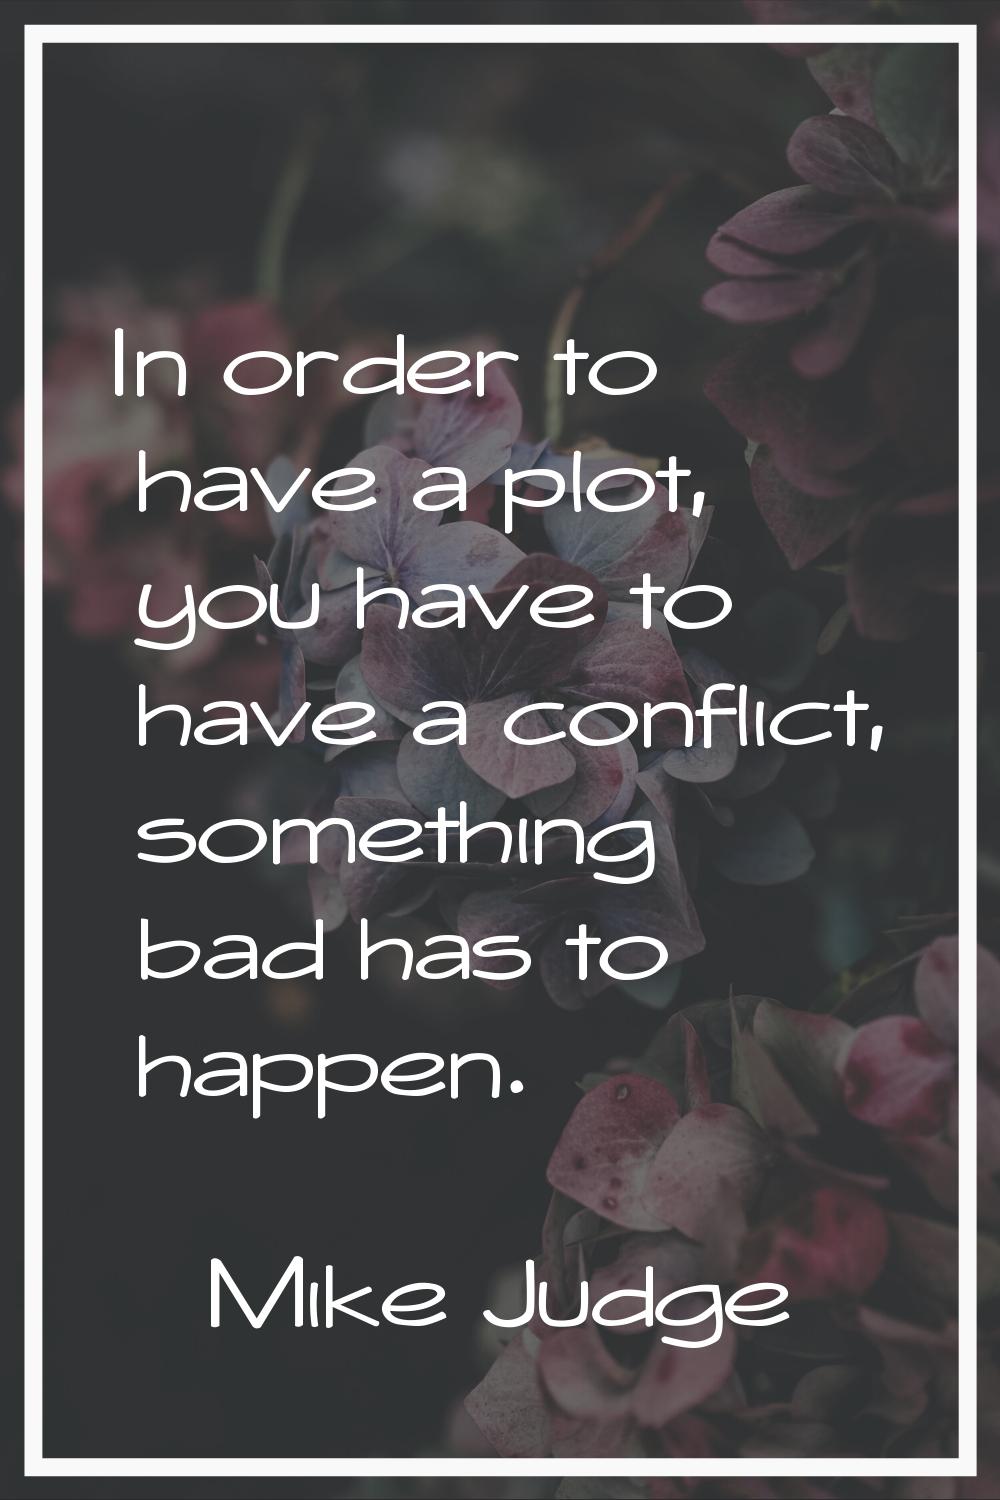 In order to have a plot, you have to have a conflict, something bad has to happen.